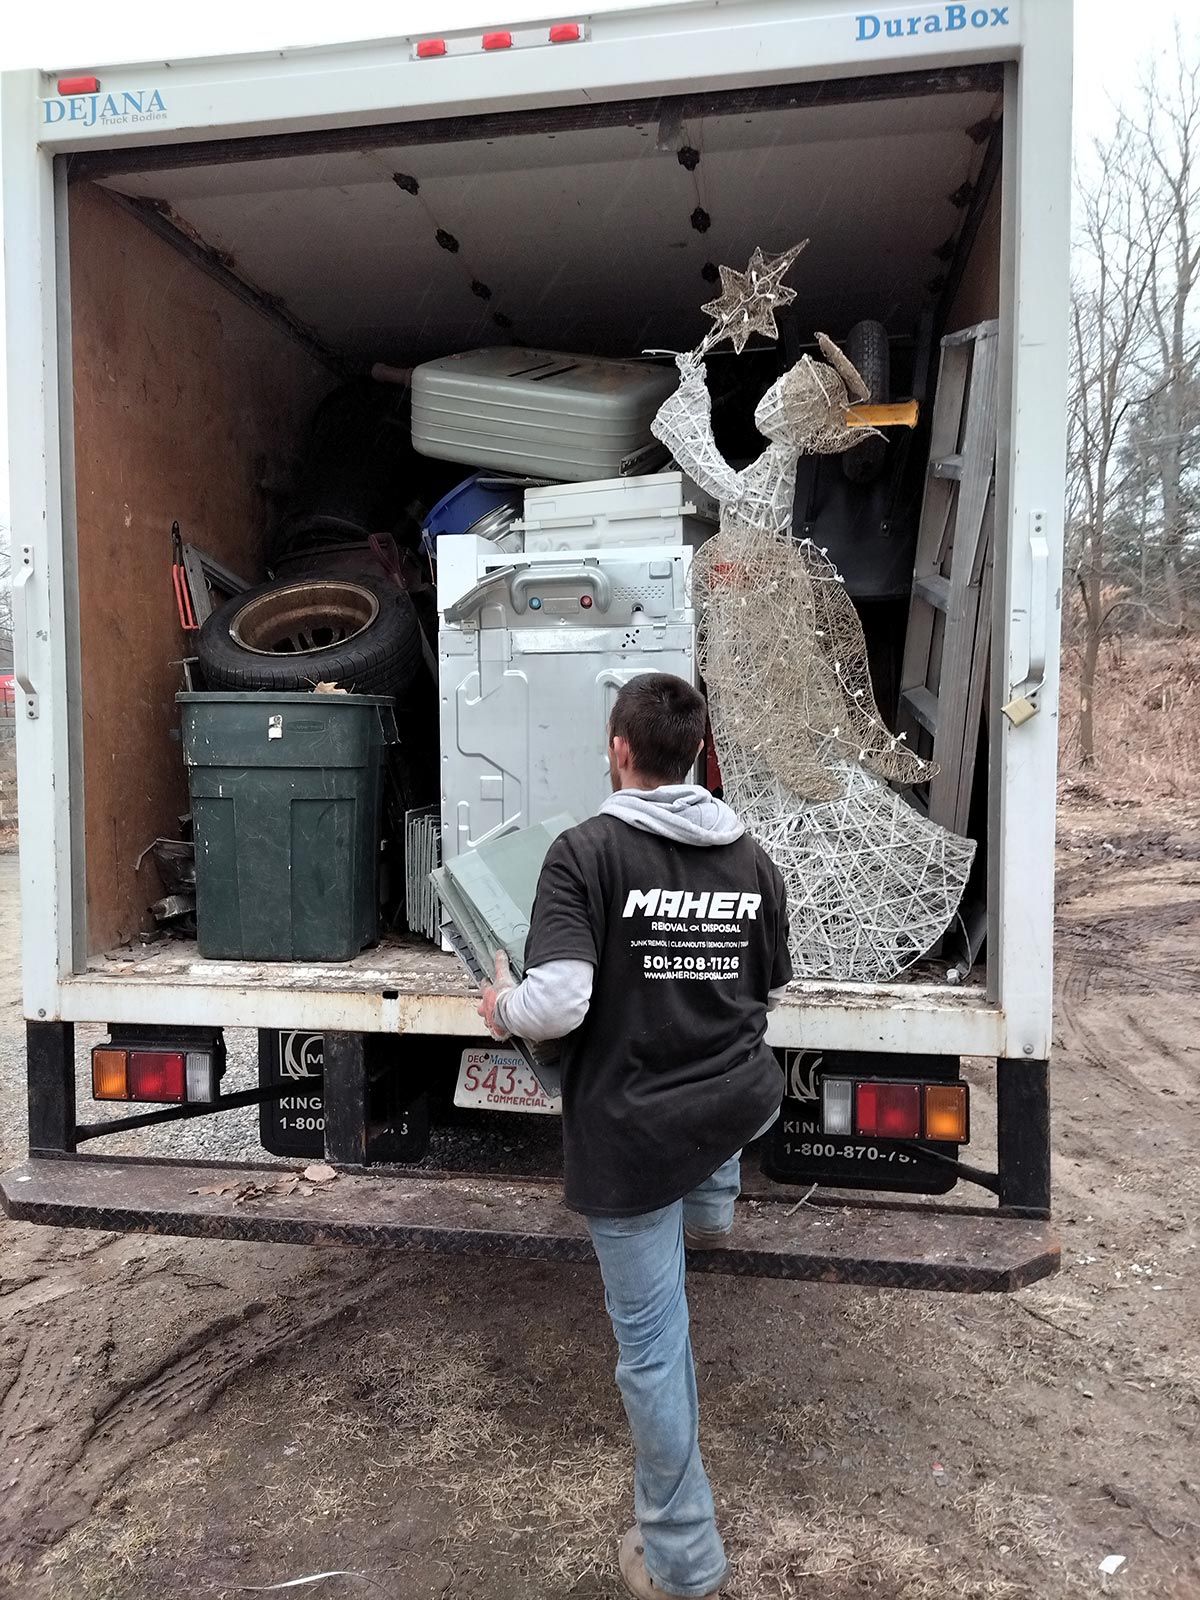 Maher Removal & Disposal offers residential junk removal services.